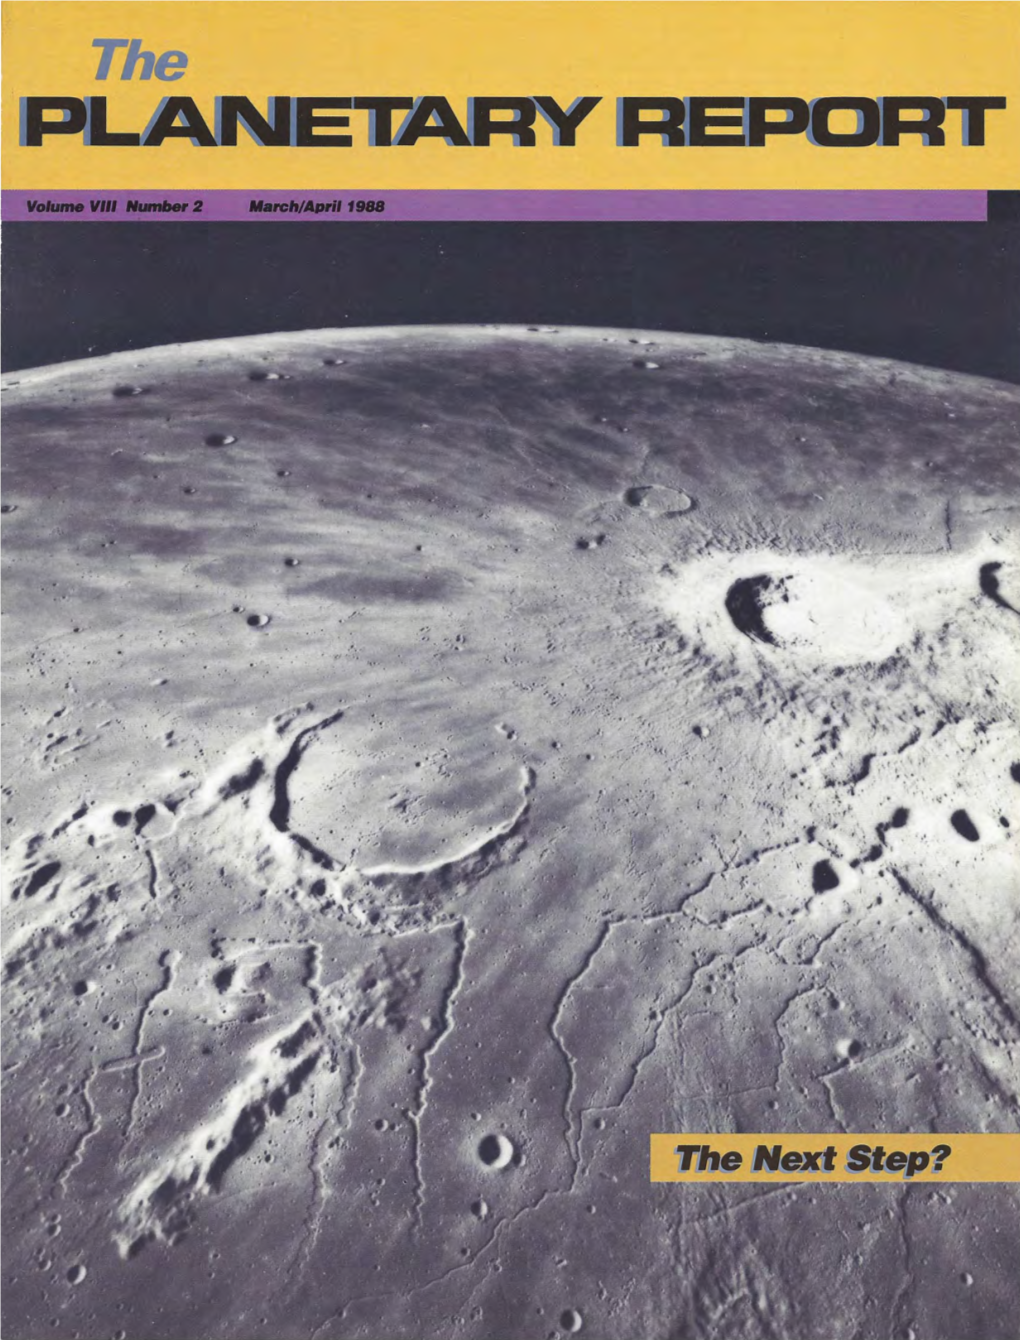 The Planetary Report Have Done an Excellent Job of Bringing the Public